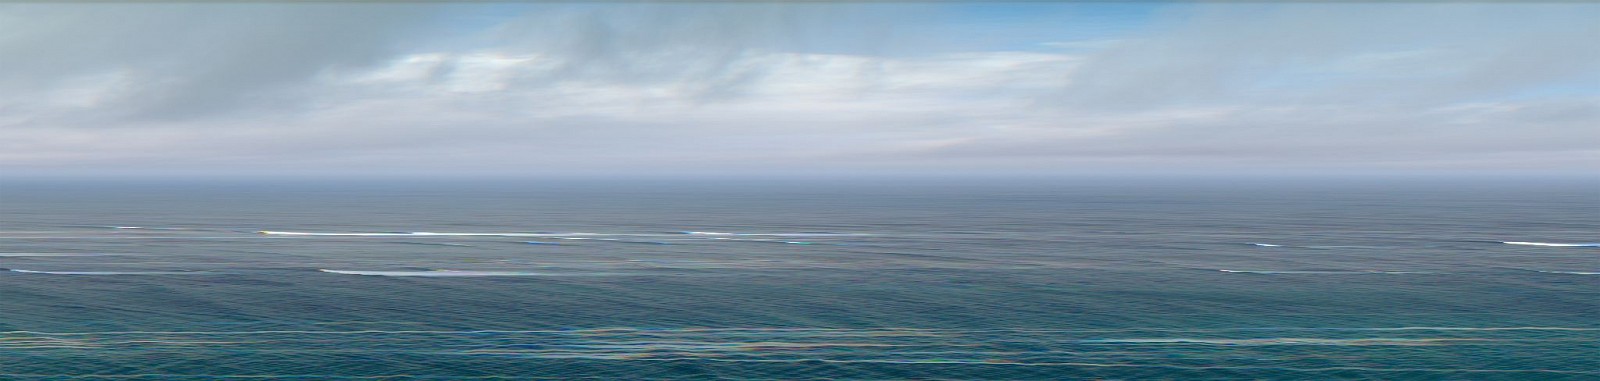 Jay Mark Johnson, CAPE OF GOOD HOPE #8, 2014 Cape of Good Hope
archival pigment on paper, mounted on aluminum, 40 x 160 in. (101.6 x 406.4 cm)